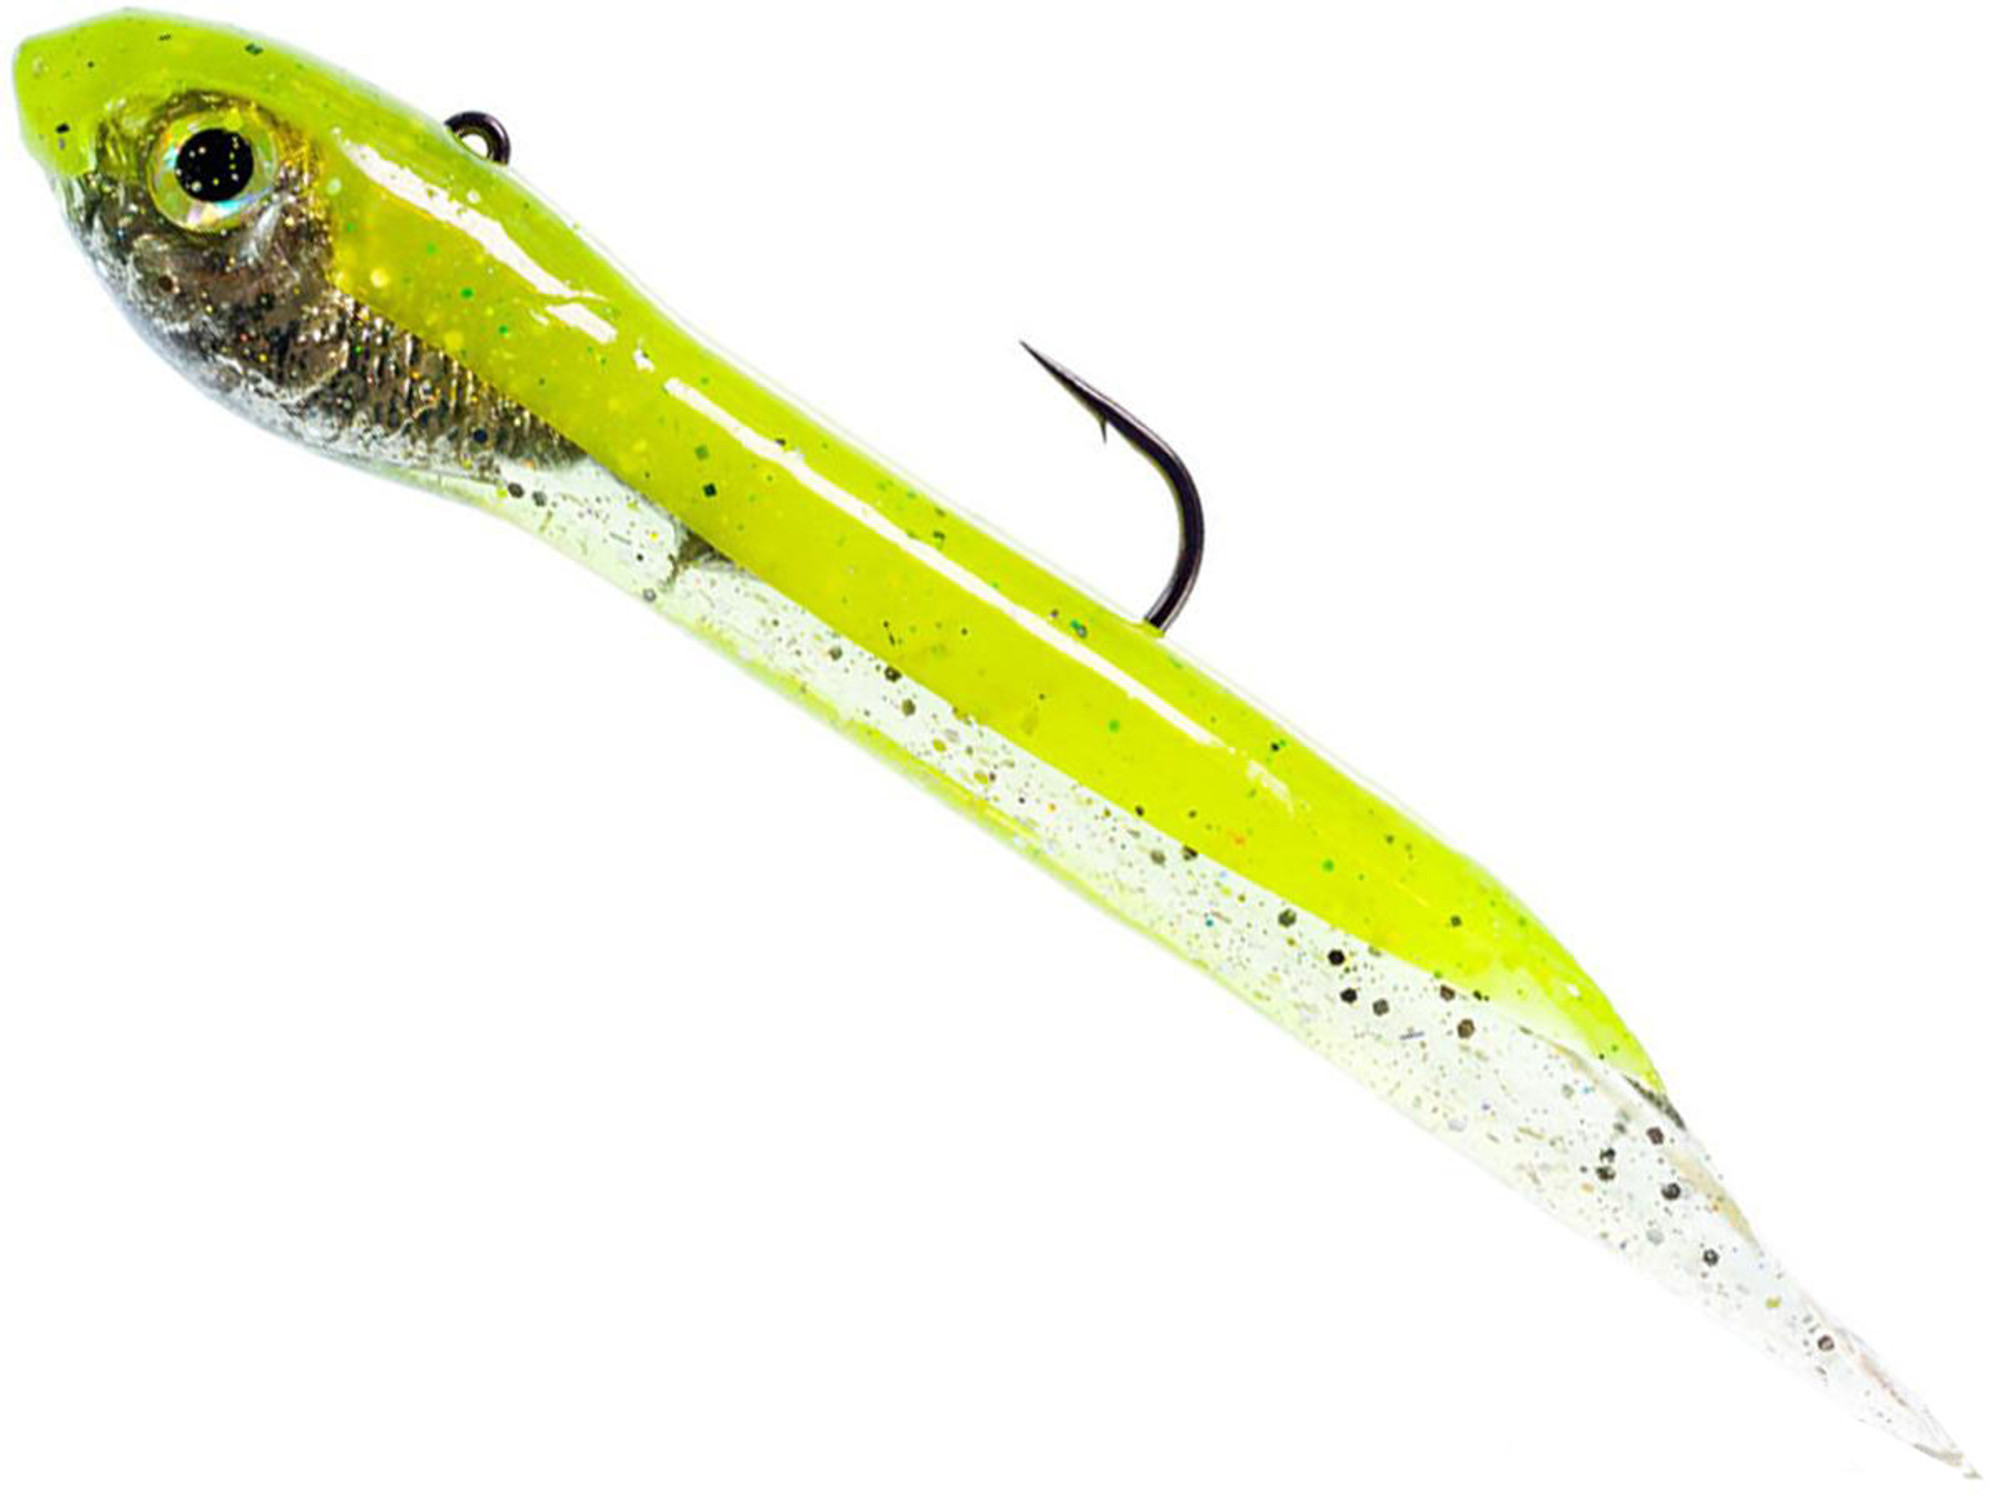 Hook Up Baits Handcrafted Soft Fishing Jigs - Glow Green Silver / 8" / 4 oz